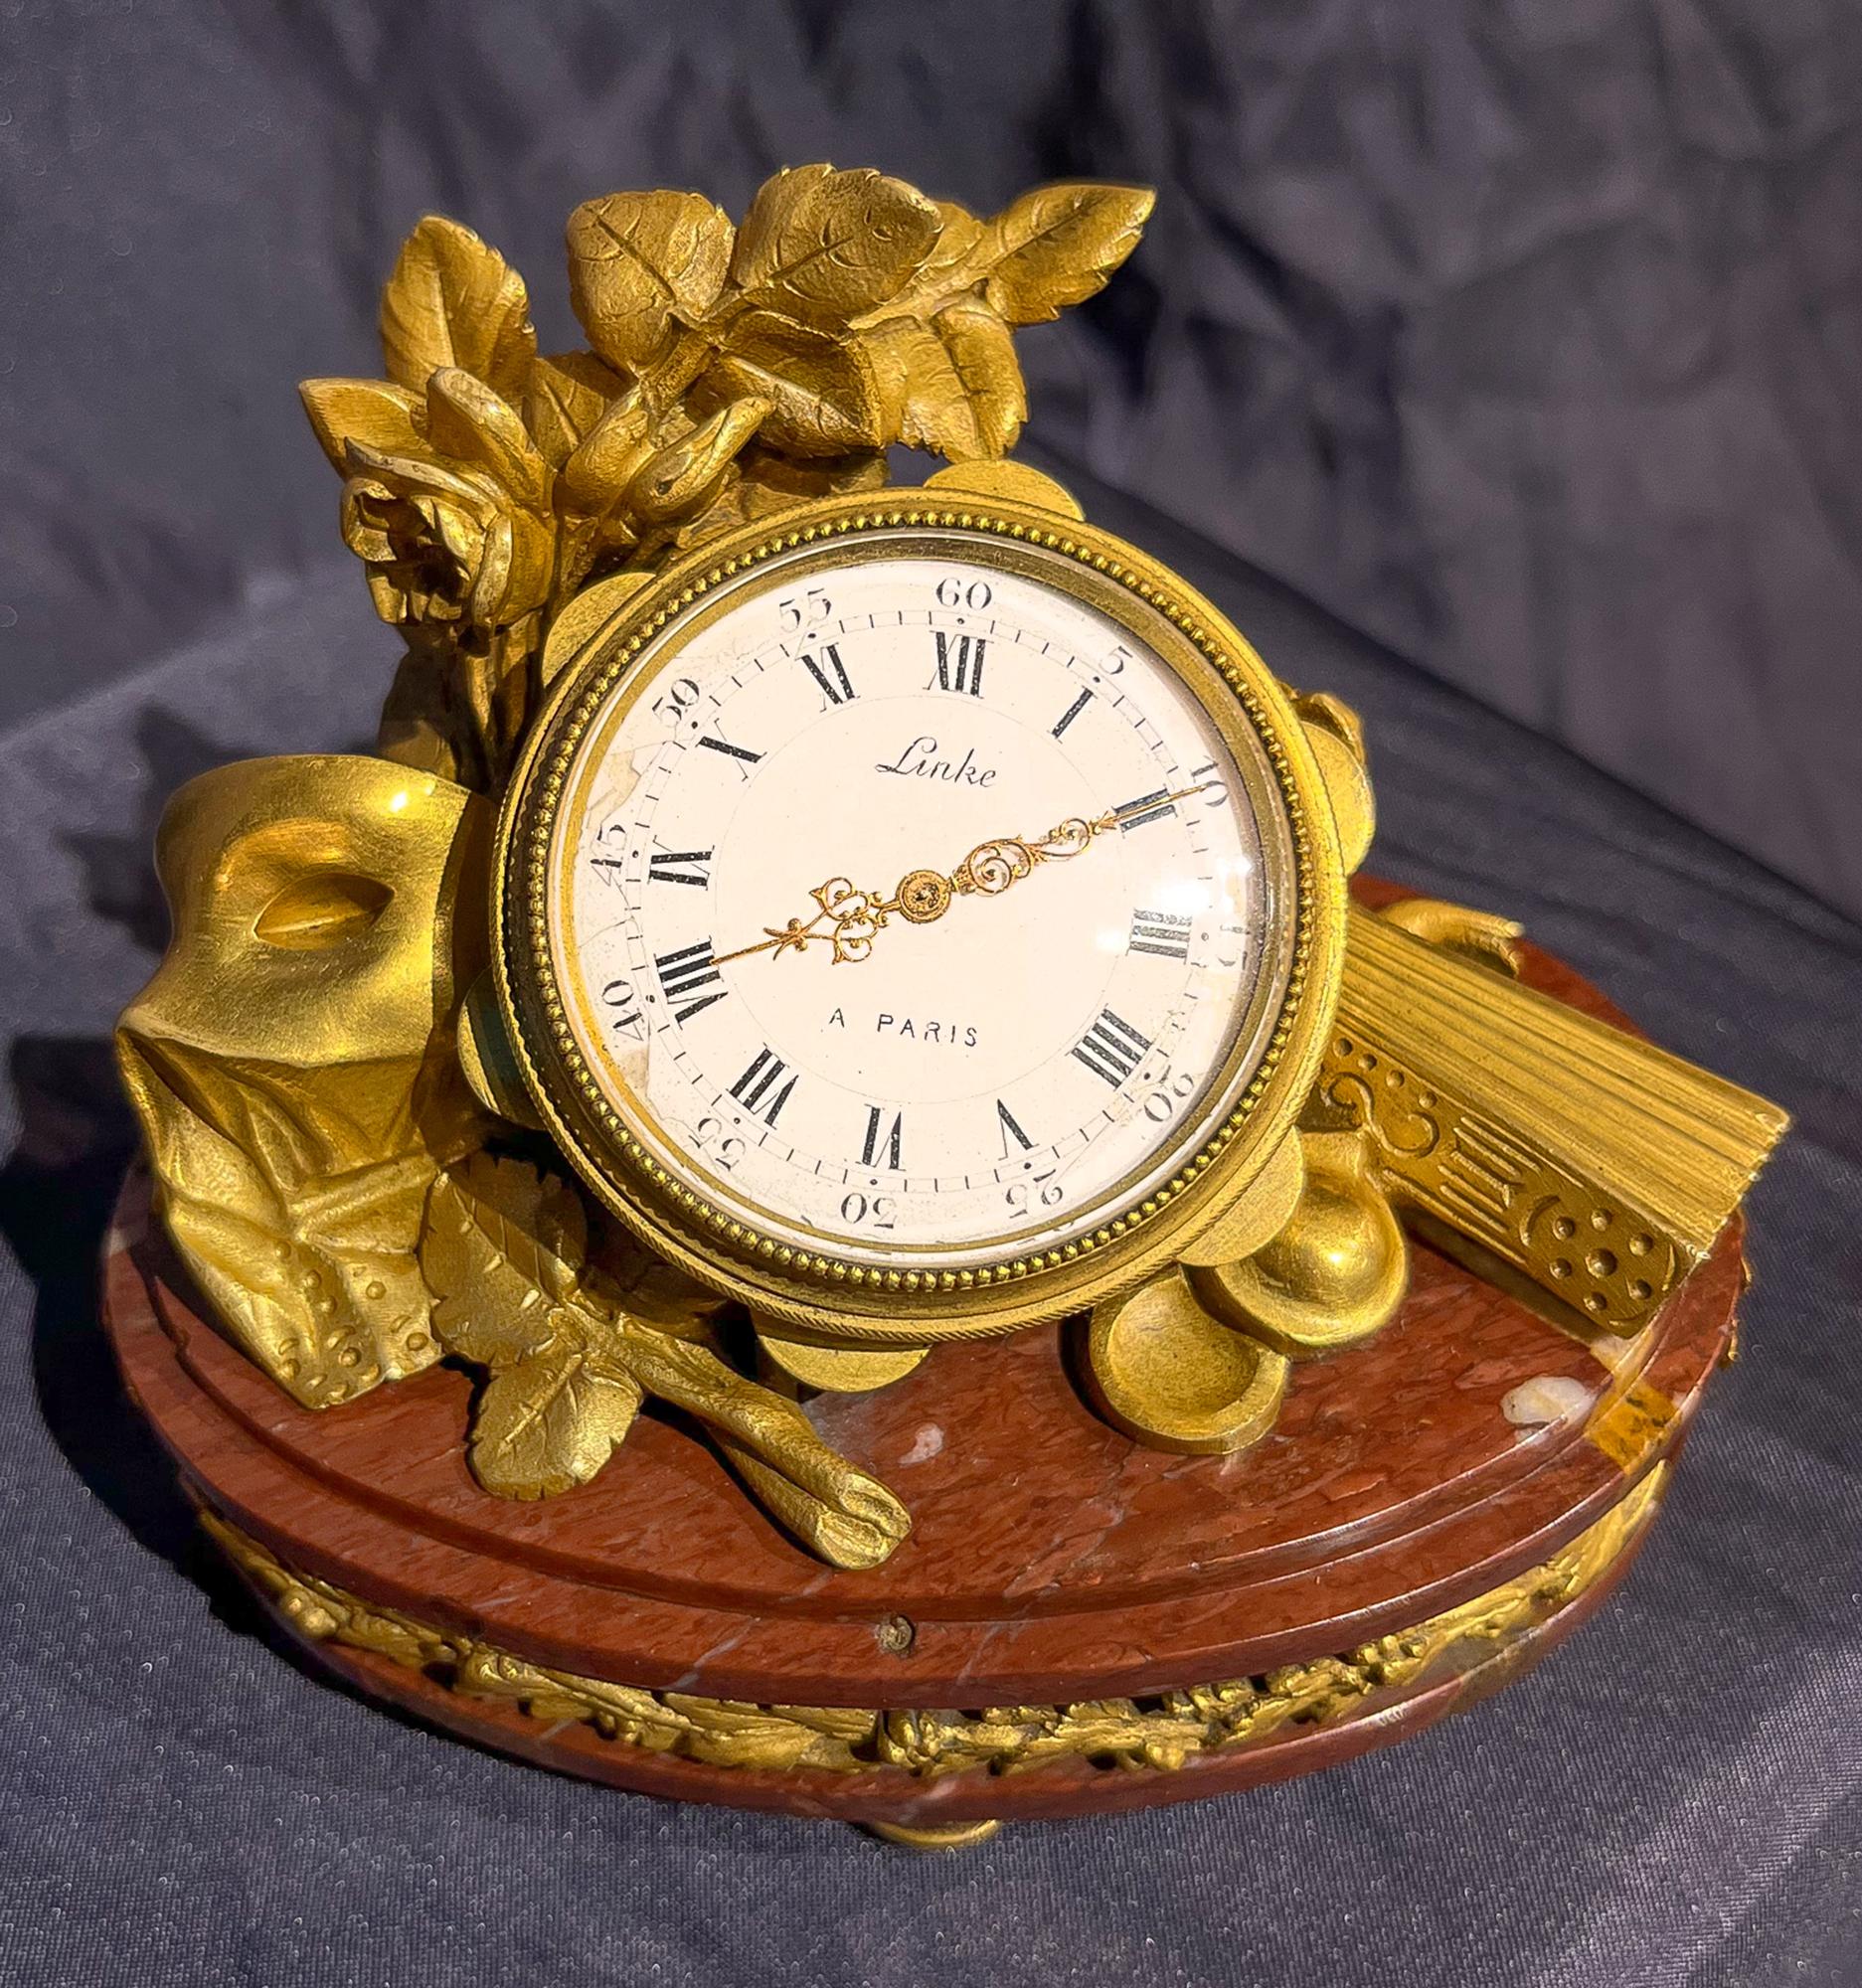 This exquisite Linke desk clock's face is nestled within a tamborine, that rests on a bouquet of roses, a masquerade mask, and a fan. The collection of items undoubtedly references a musical or the aftermath of a grand 18th century ball. Clocks from